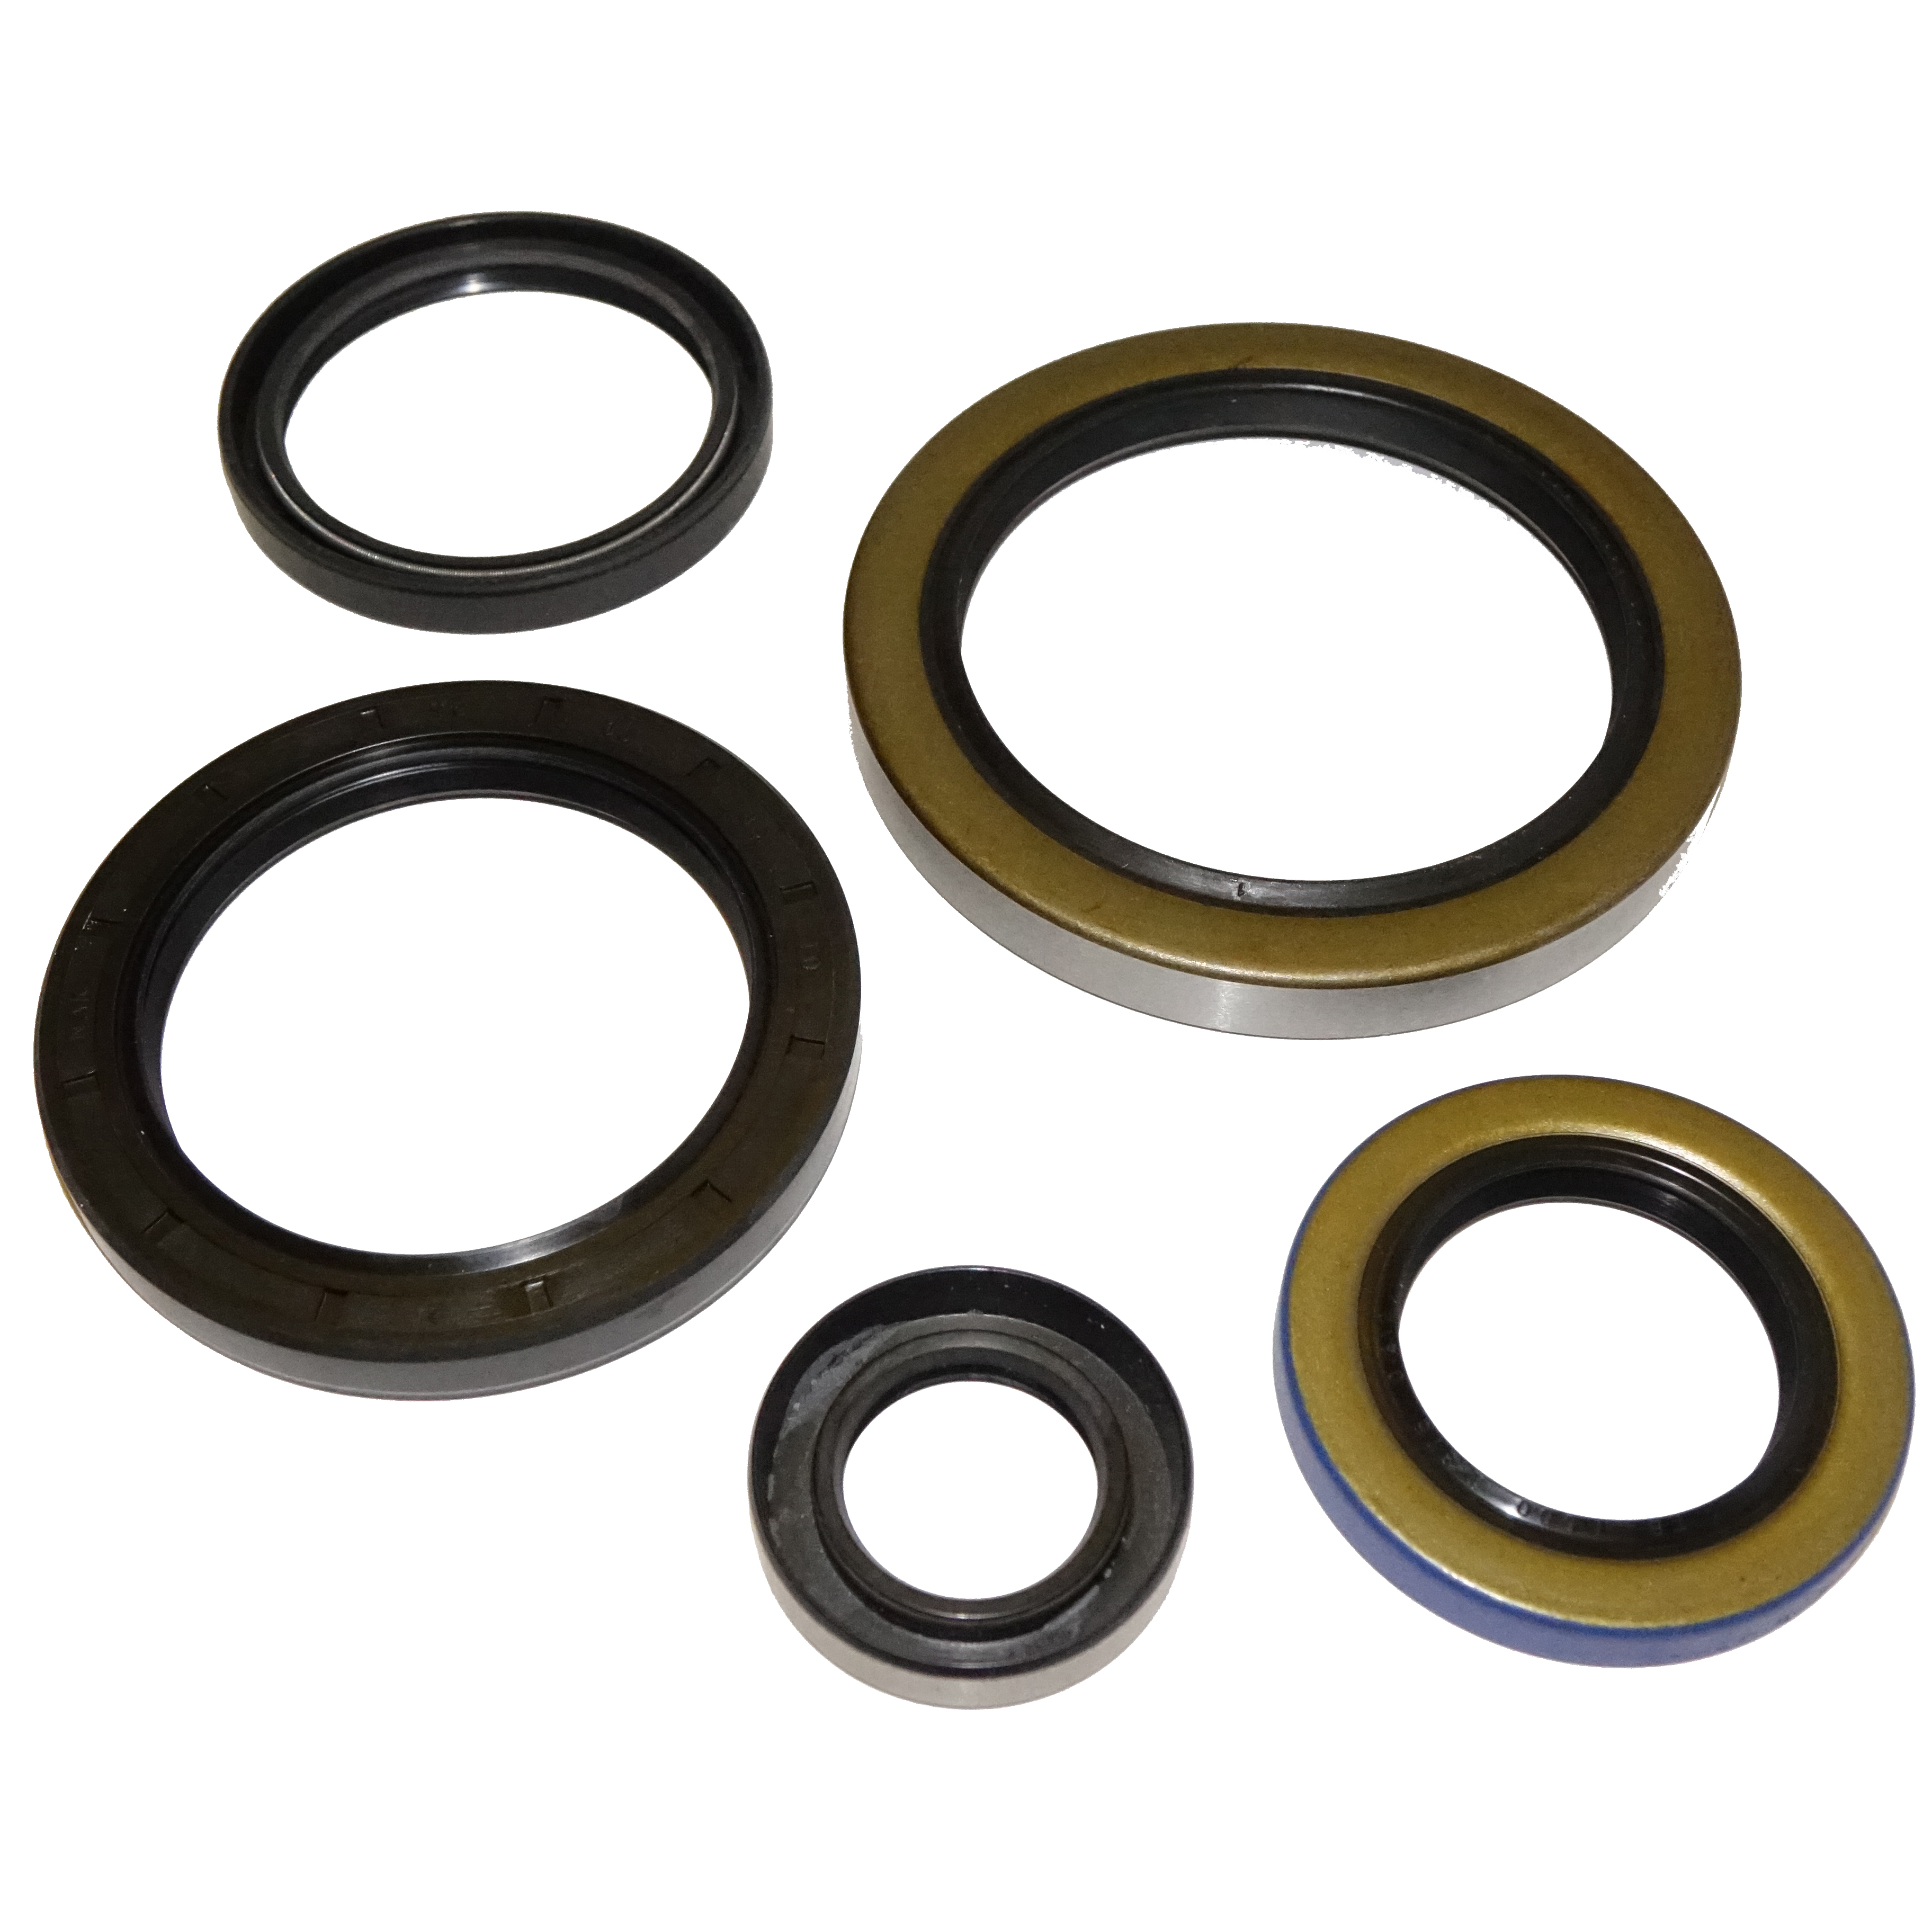 swh771084ca223284 SuperWarehouse Grooved Rubber O Ring Skeleton Oil Seal Gasket Black 37mm x 20mm x 7mm